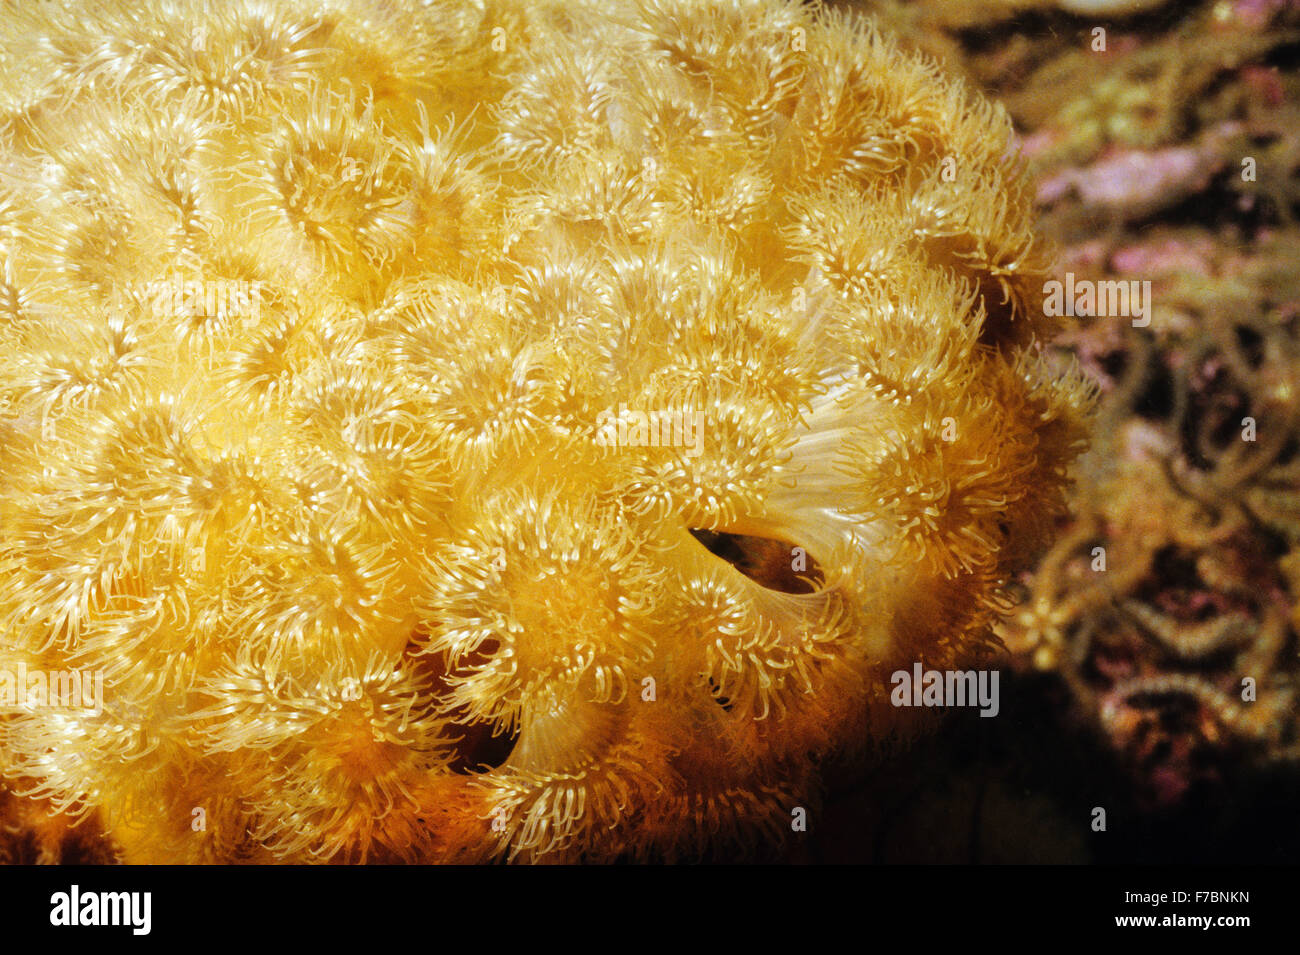 Amazing underwater marine life off the coast at St Abbs Scotland. Close up of a Plumose anemone. Stock Photo